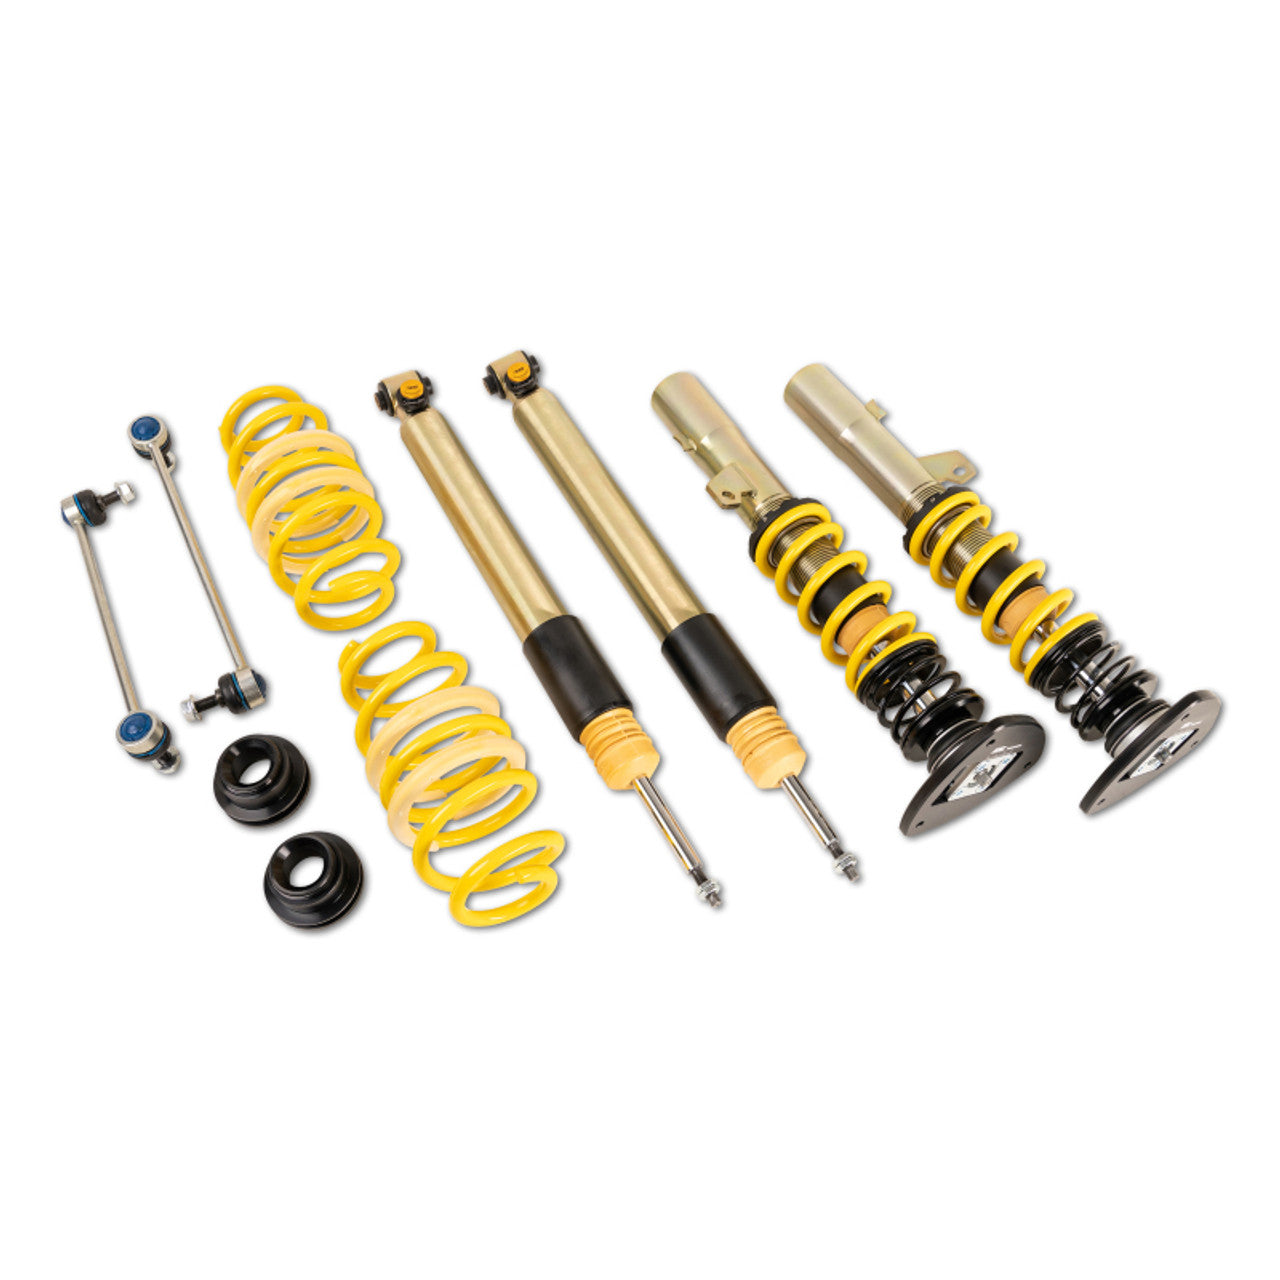 ST Suspensions XTA Plus 3 Performance Coilovers - VW MK7 Golf With IRS (55mm front strut)